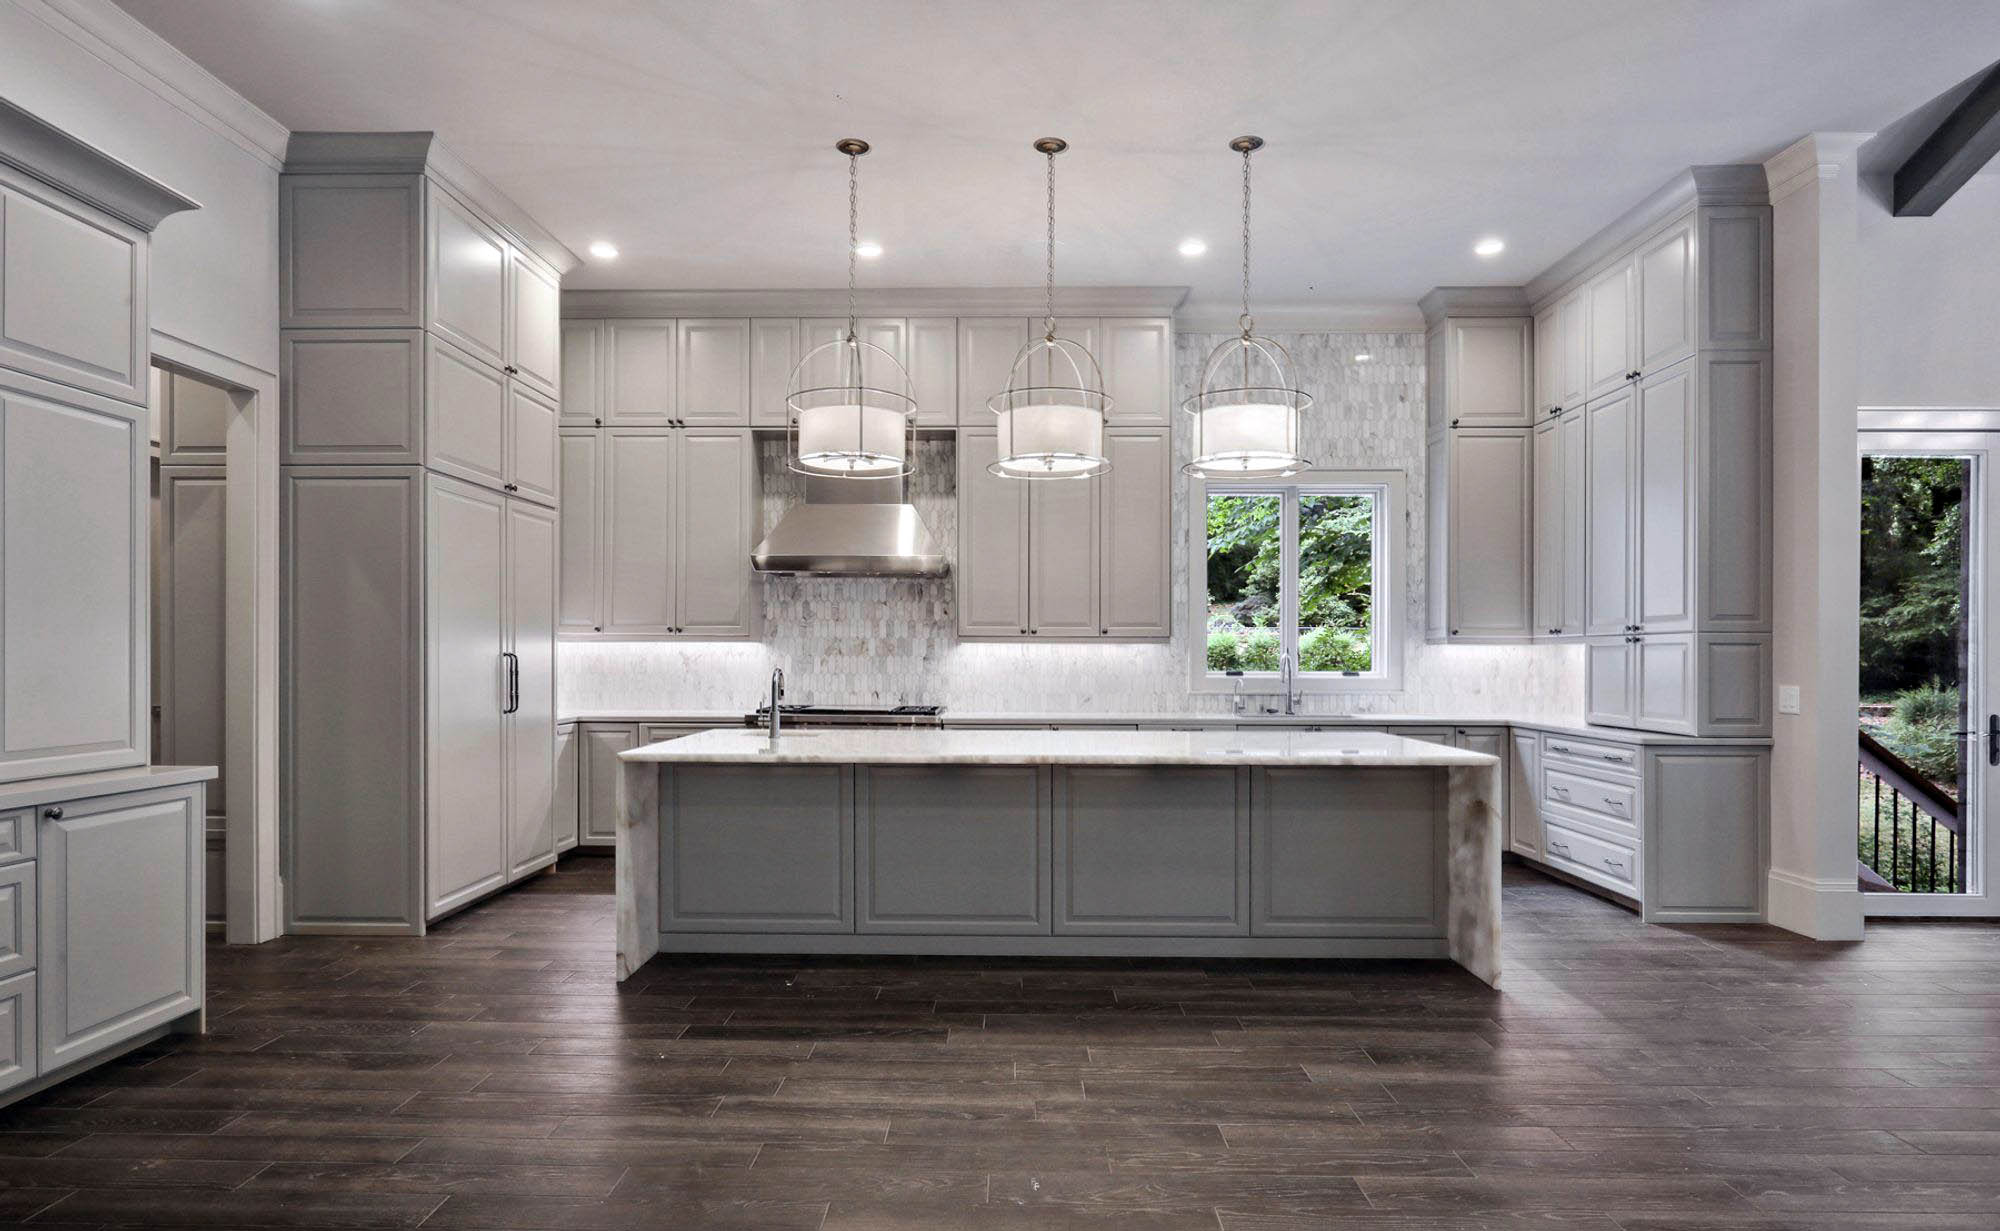 Gray tile wood floors with gray cabinets and marble countertops.